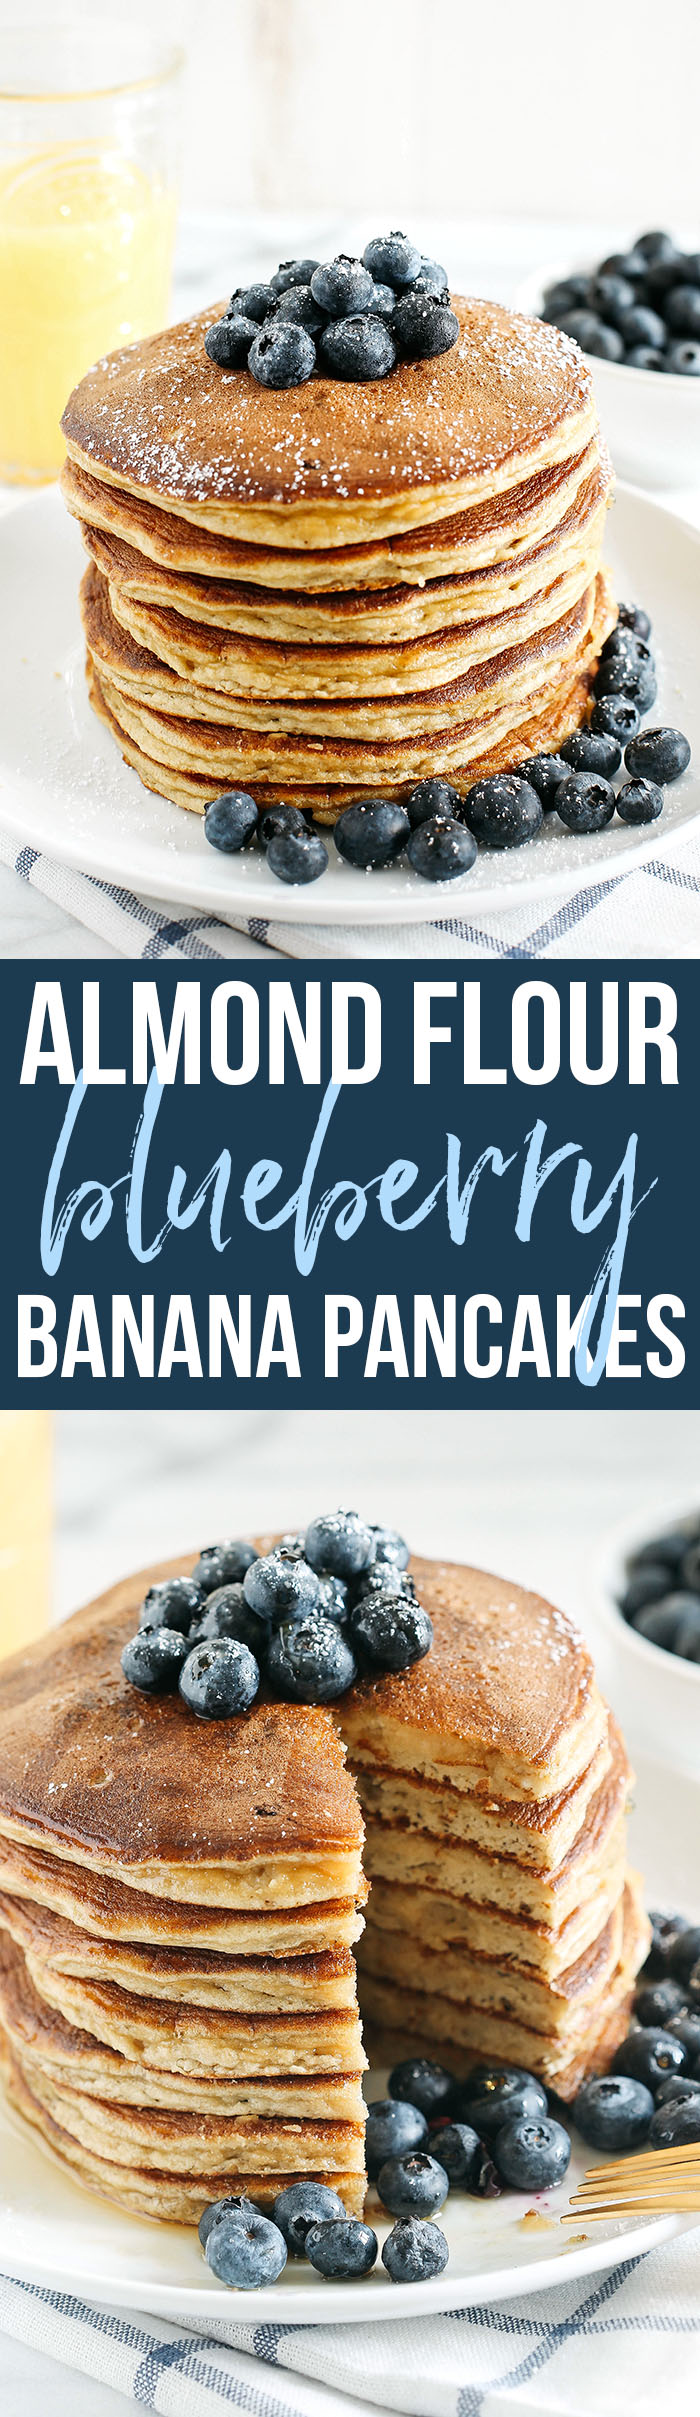 Start your morning with these fluffy blueberry banana pancakes that are grain-free, gluten-free and refined sugar-free and made with almond flour for an easy delicious breakfast!